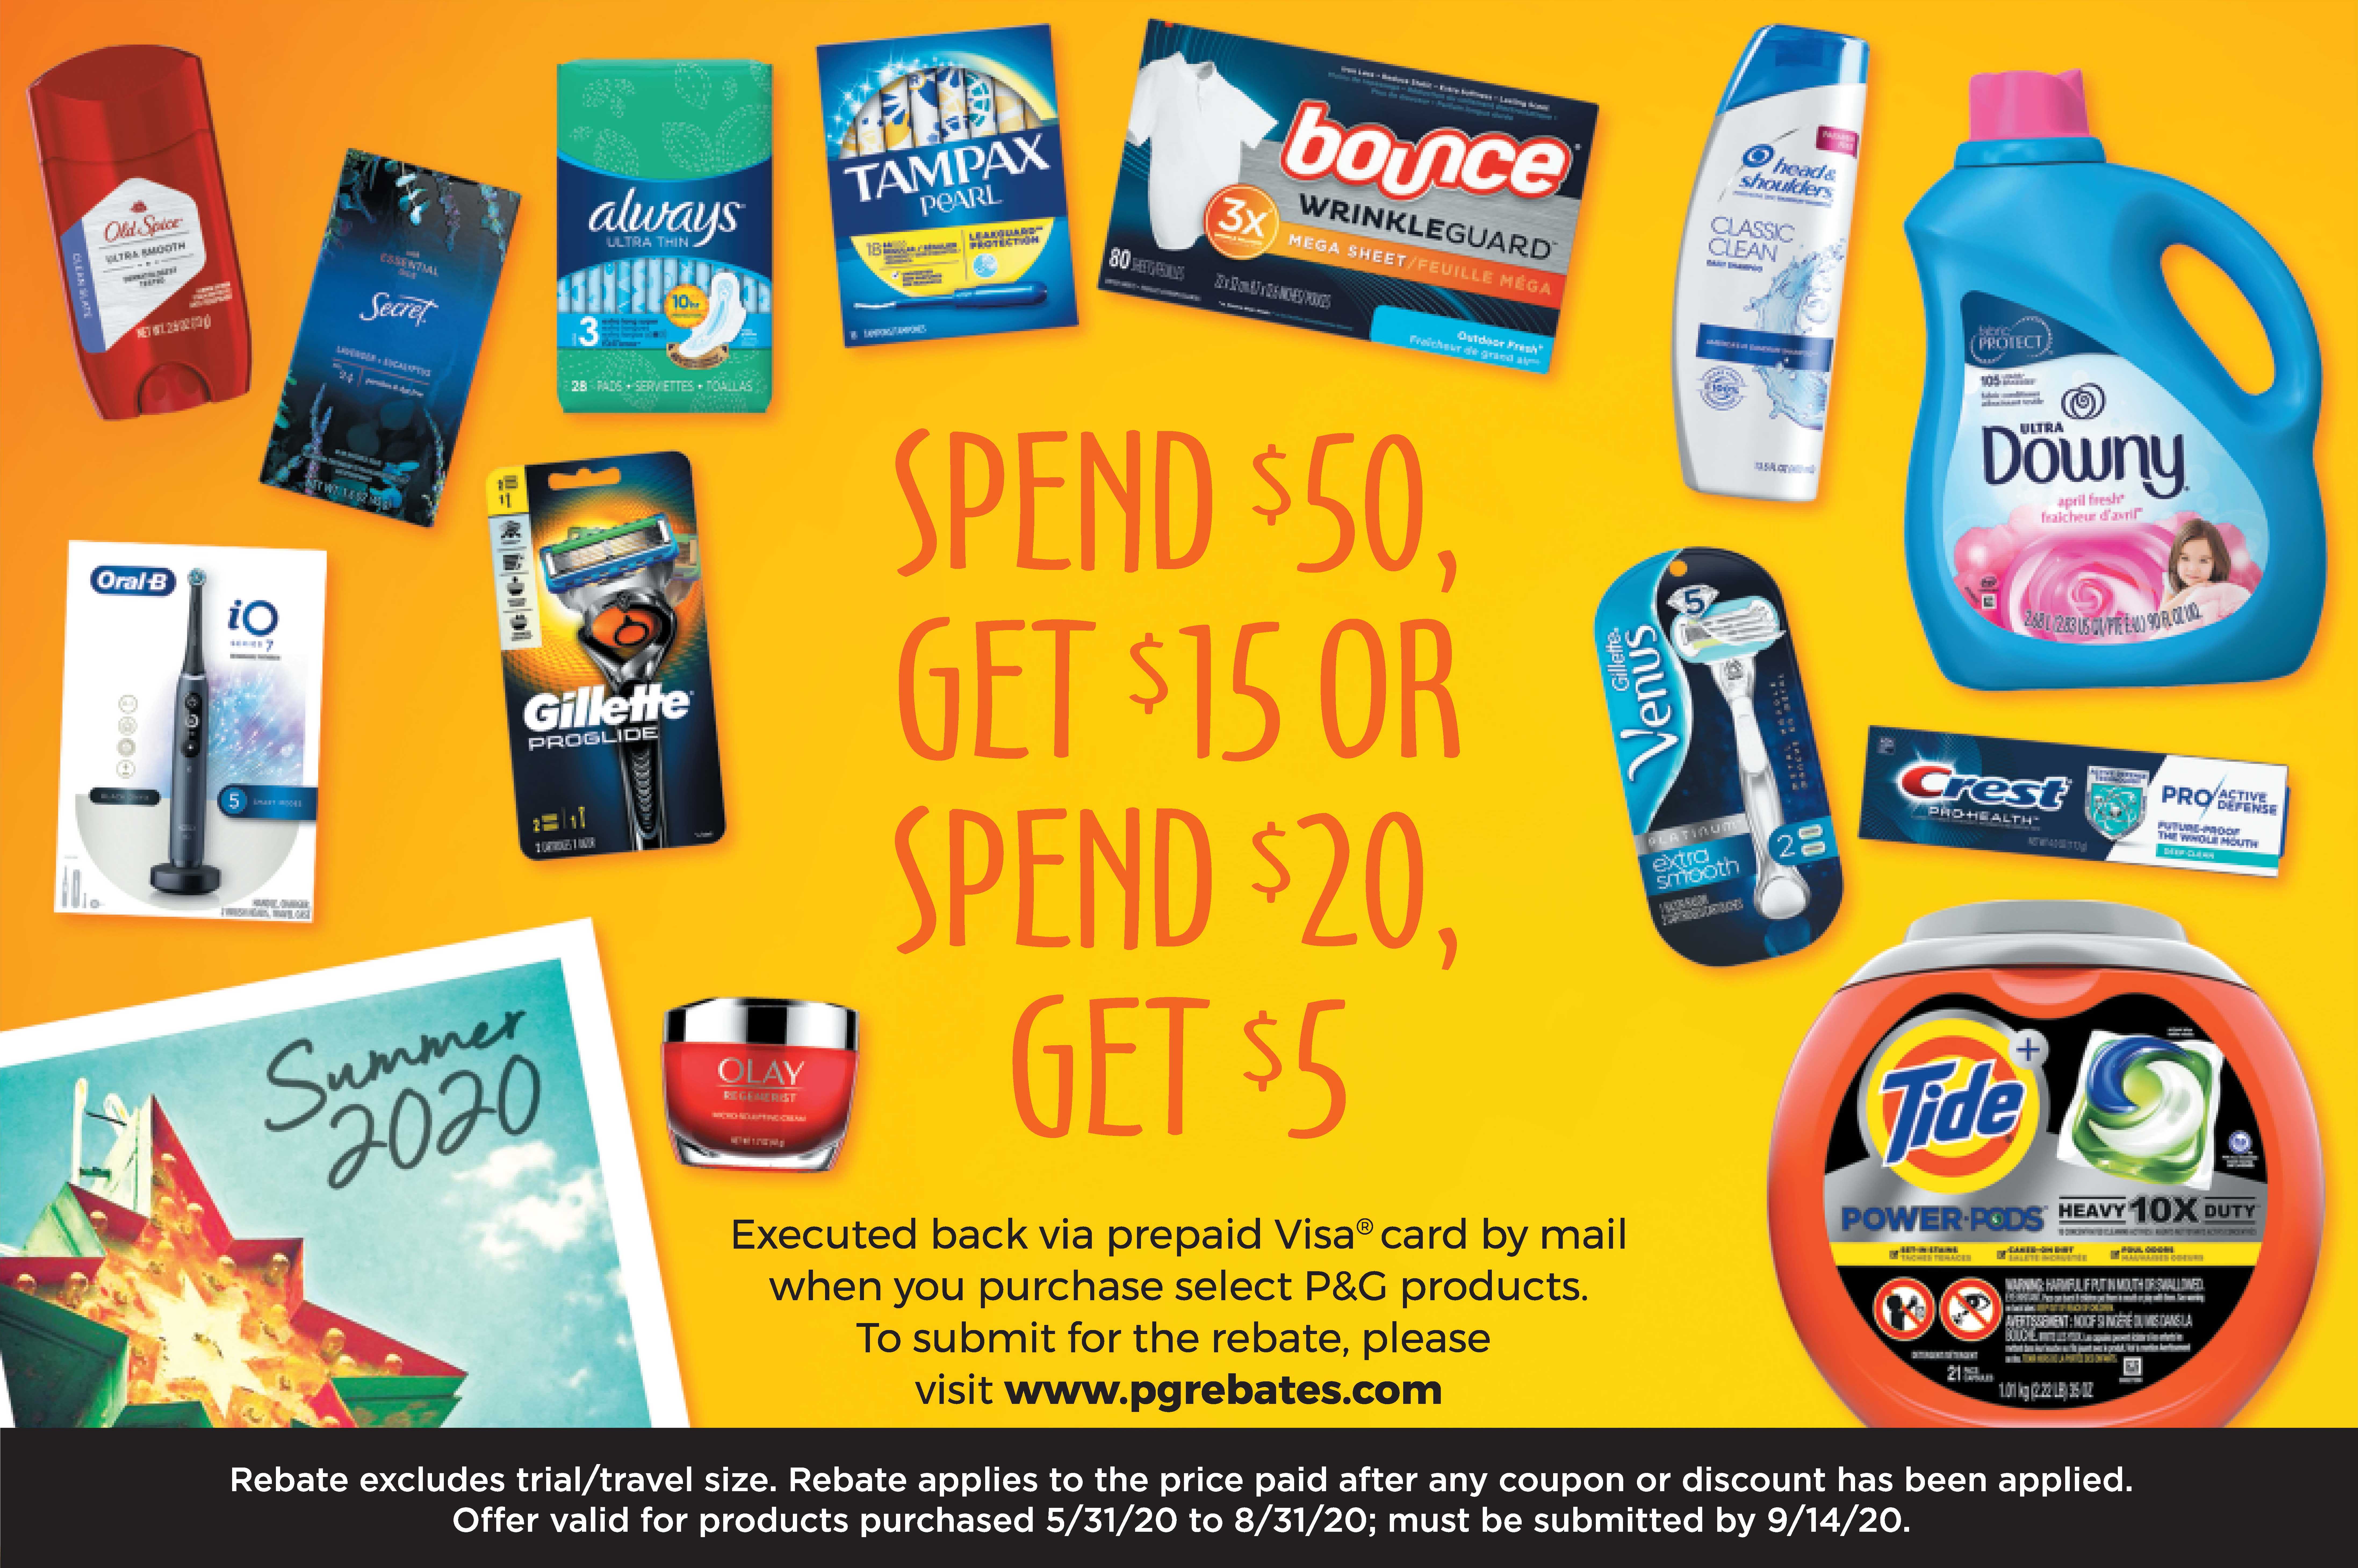  15 FREE From Procter Gamble With Summer Rewards Rebate Offer